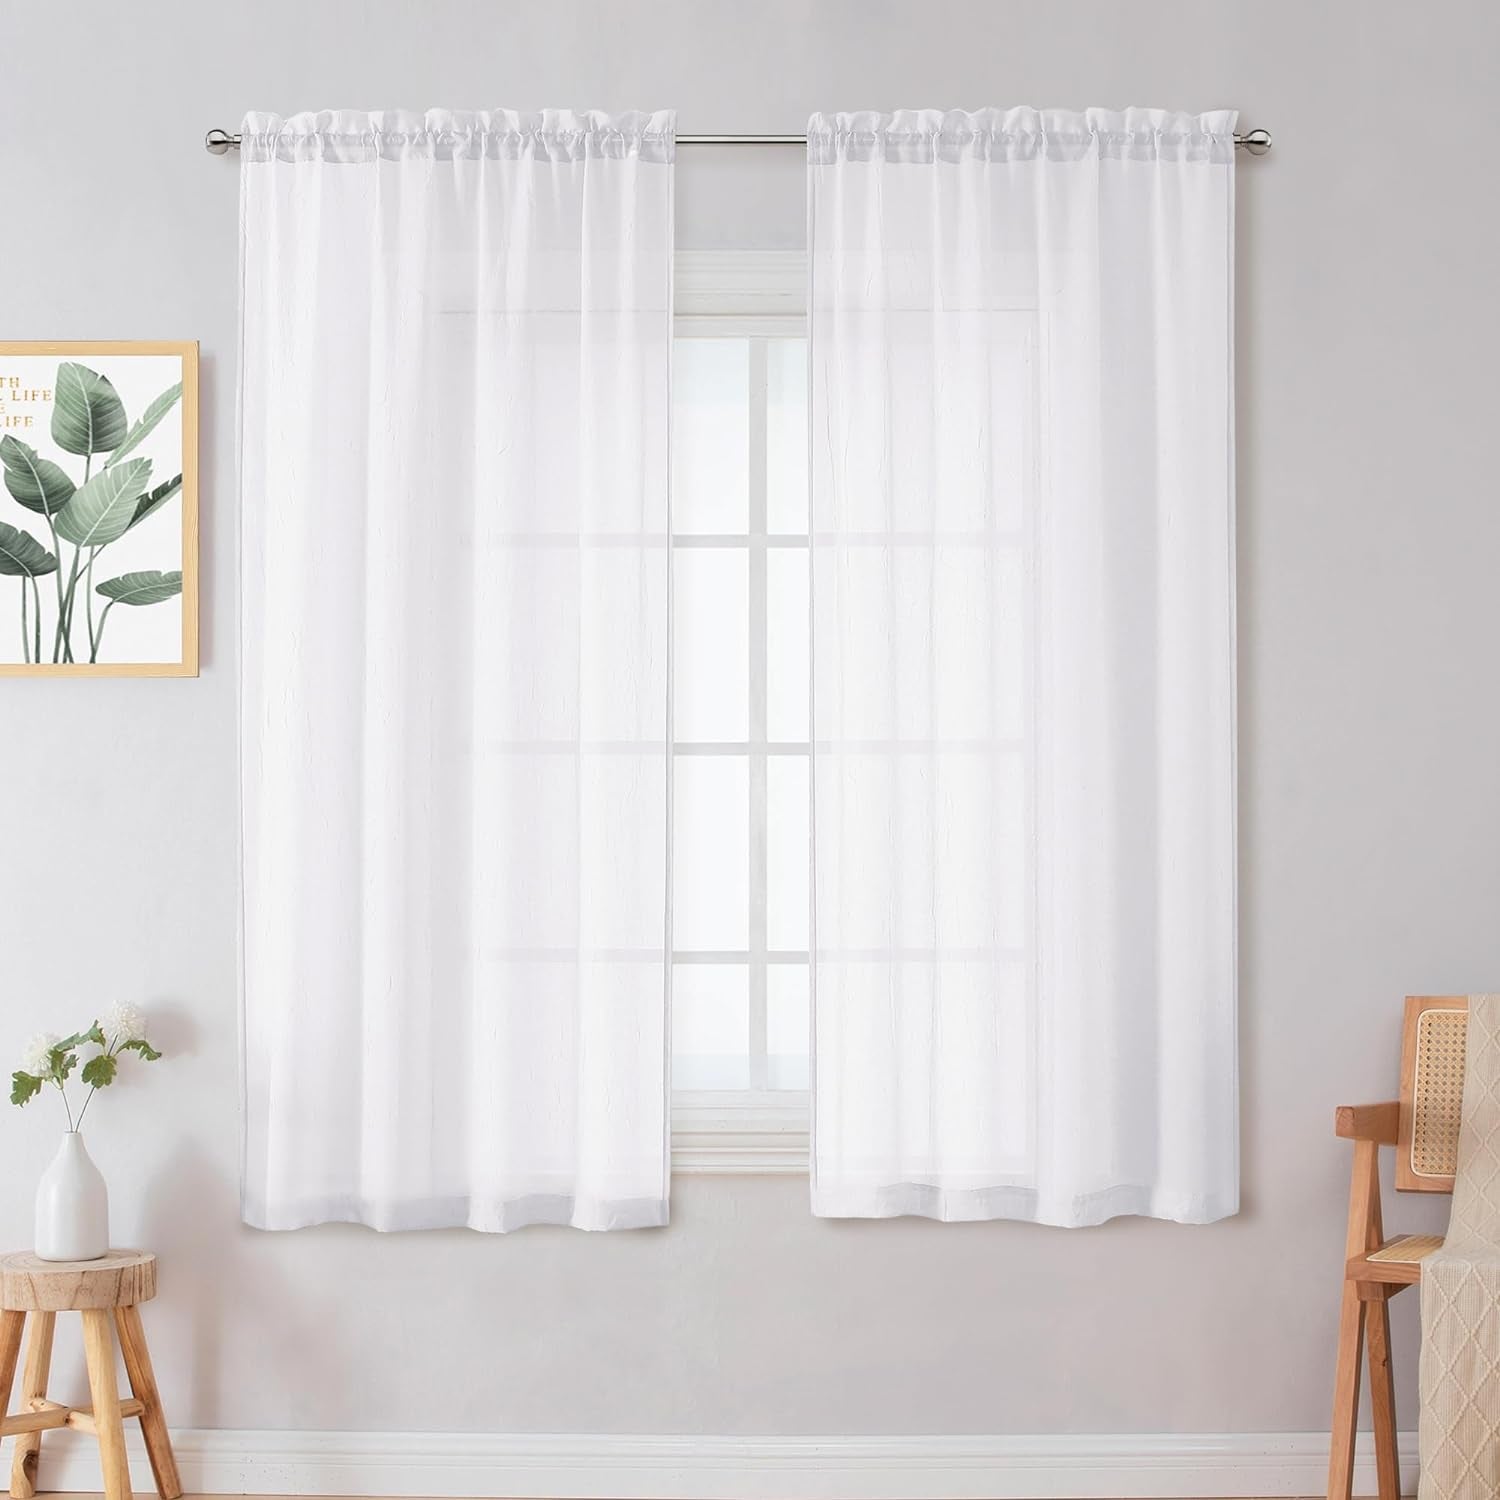 Crushed Sheer White Curtains 63 Inch Length 2 Panels, Light Filtering Solid Crinkle Voile Short Sheer Curtian for Bedroom Living Room, Each 42Wx63L Inches  Chyhomenyc   